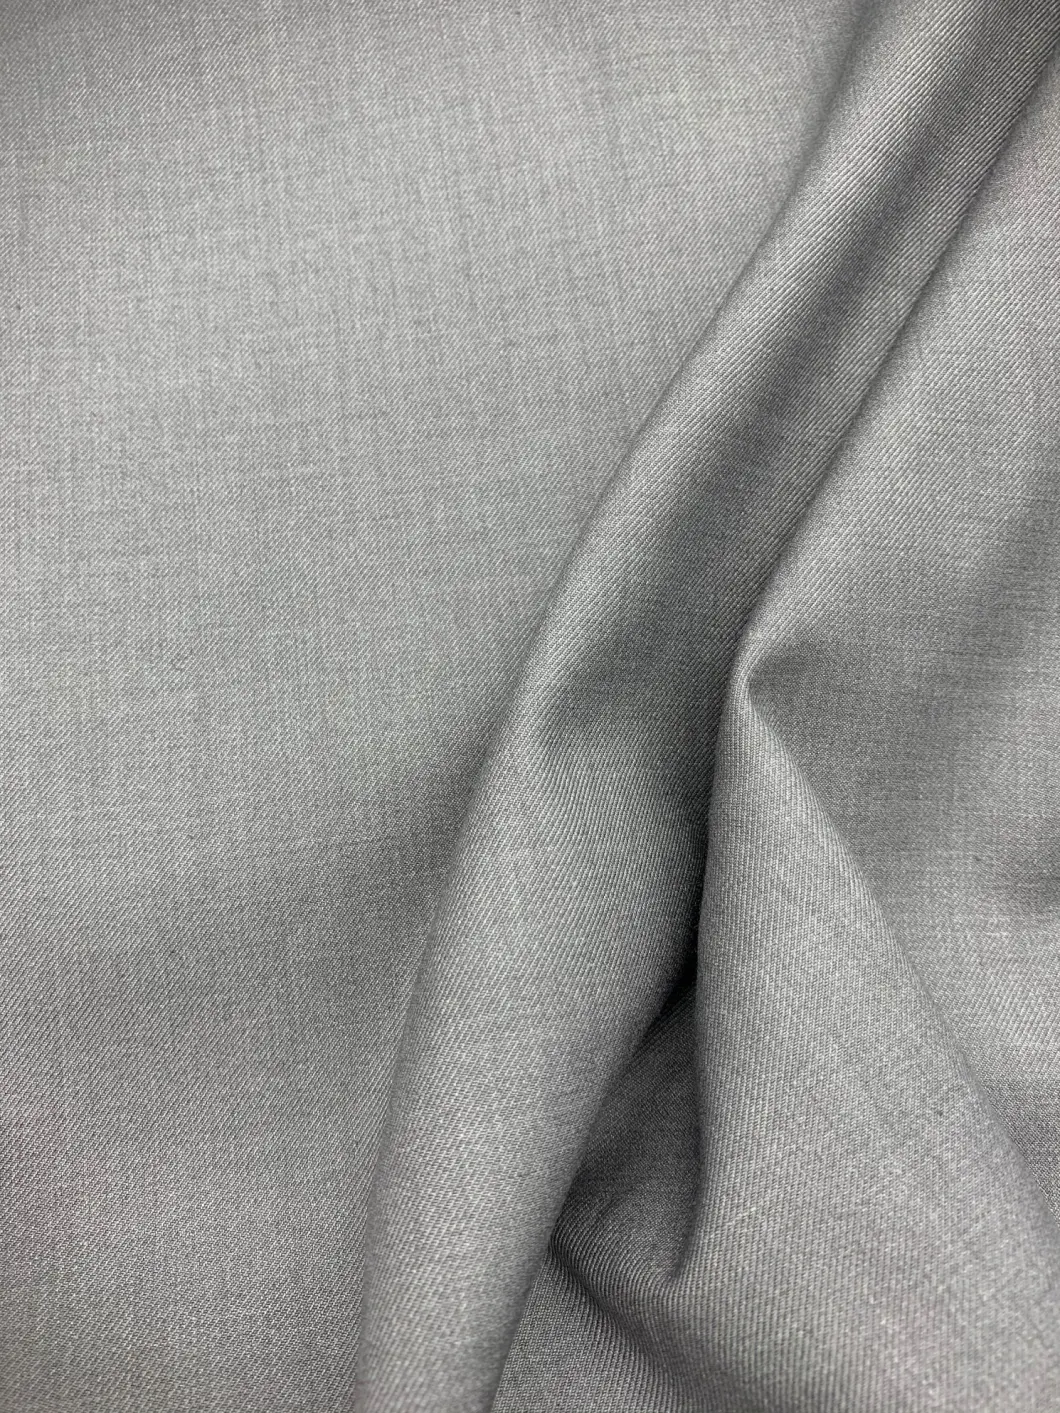 Tr Suiting Fabric for Workwear and Ladies Men's Suit Fabric